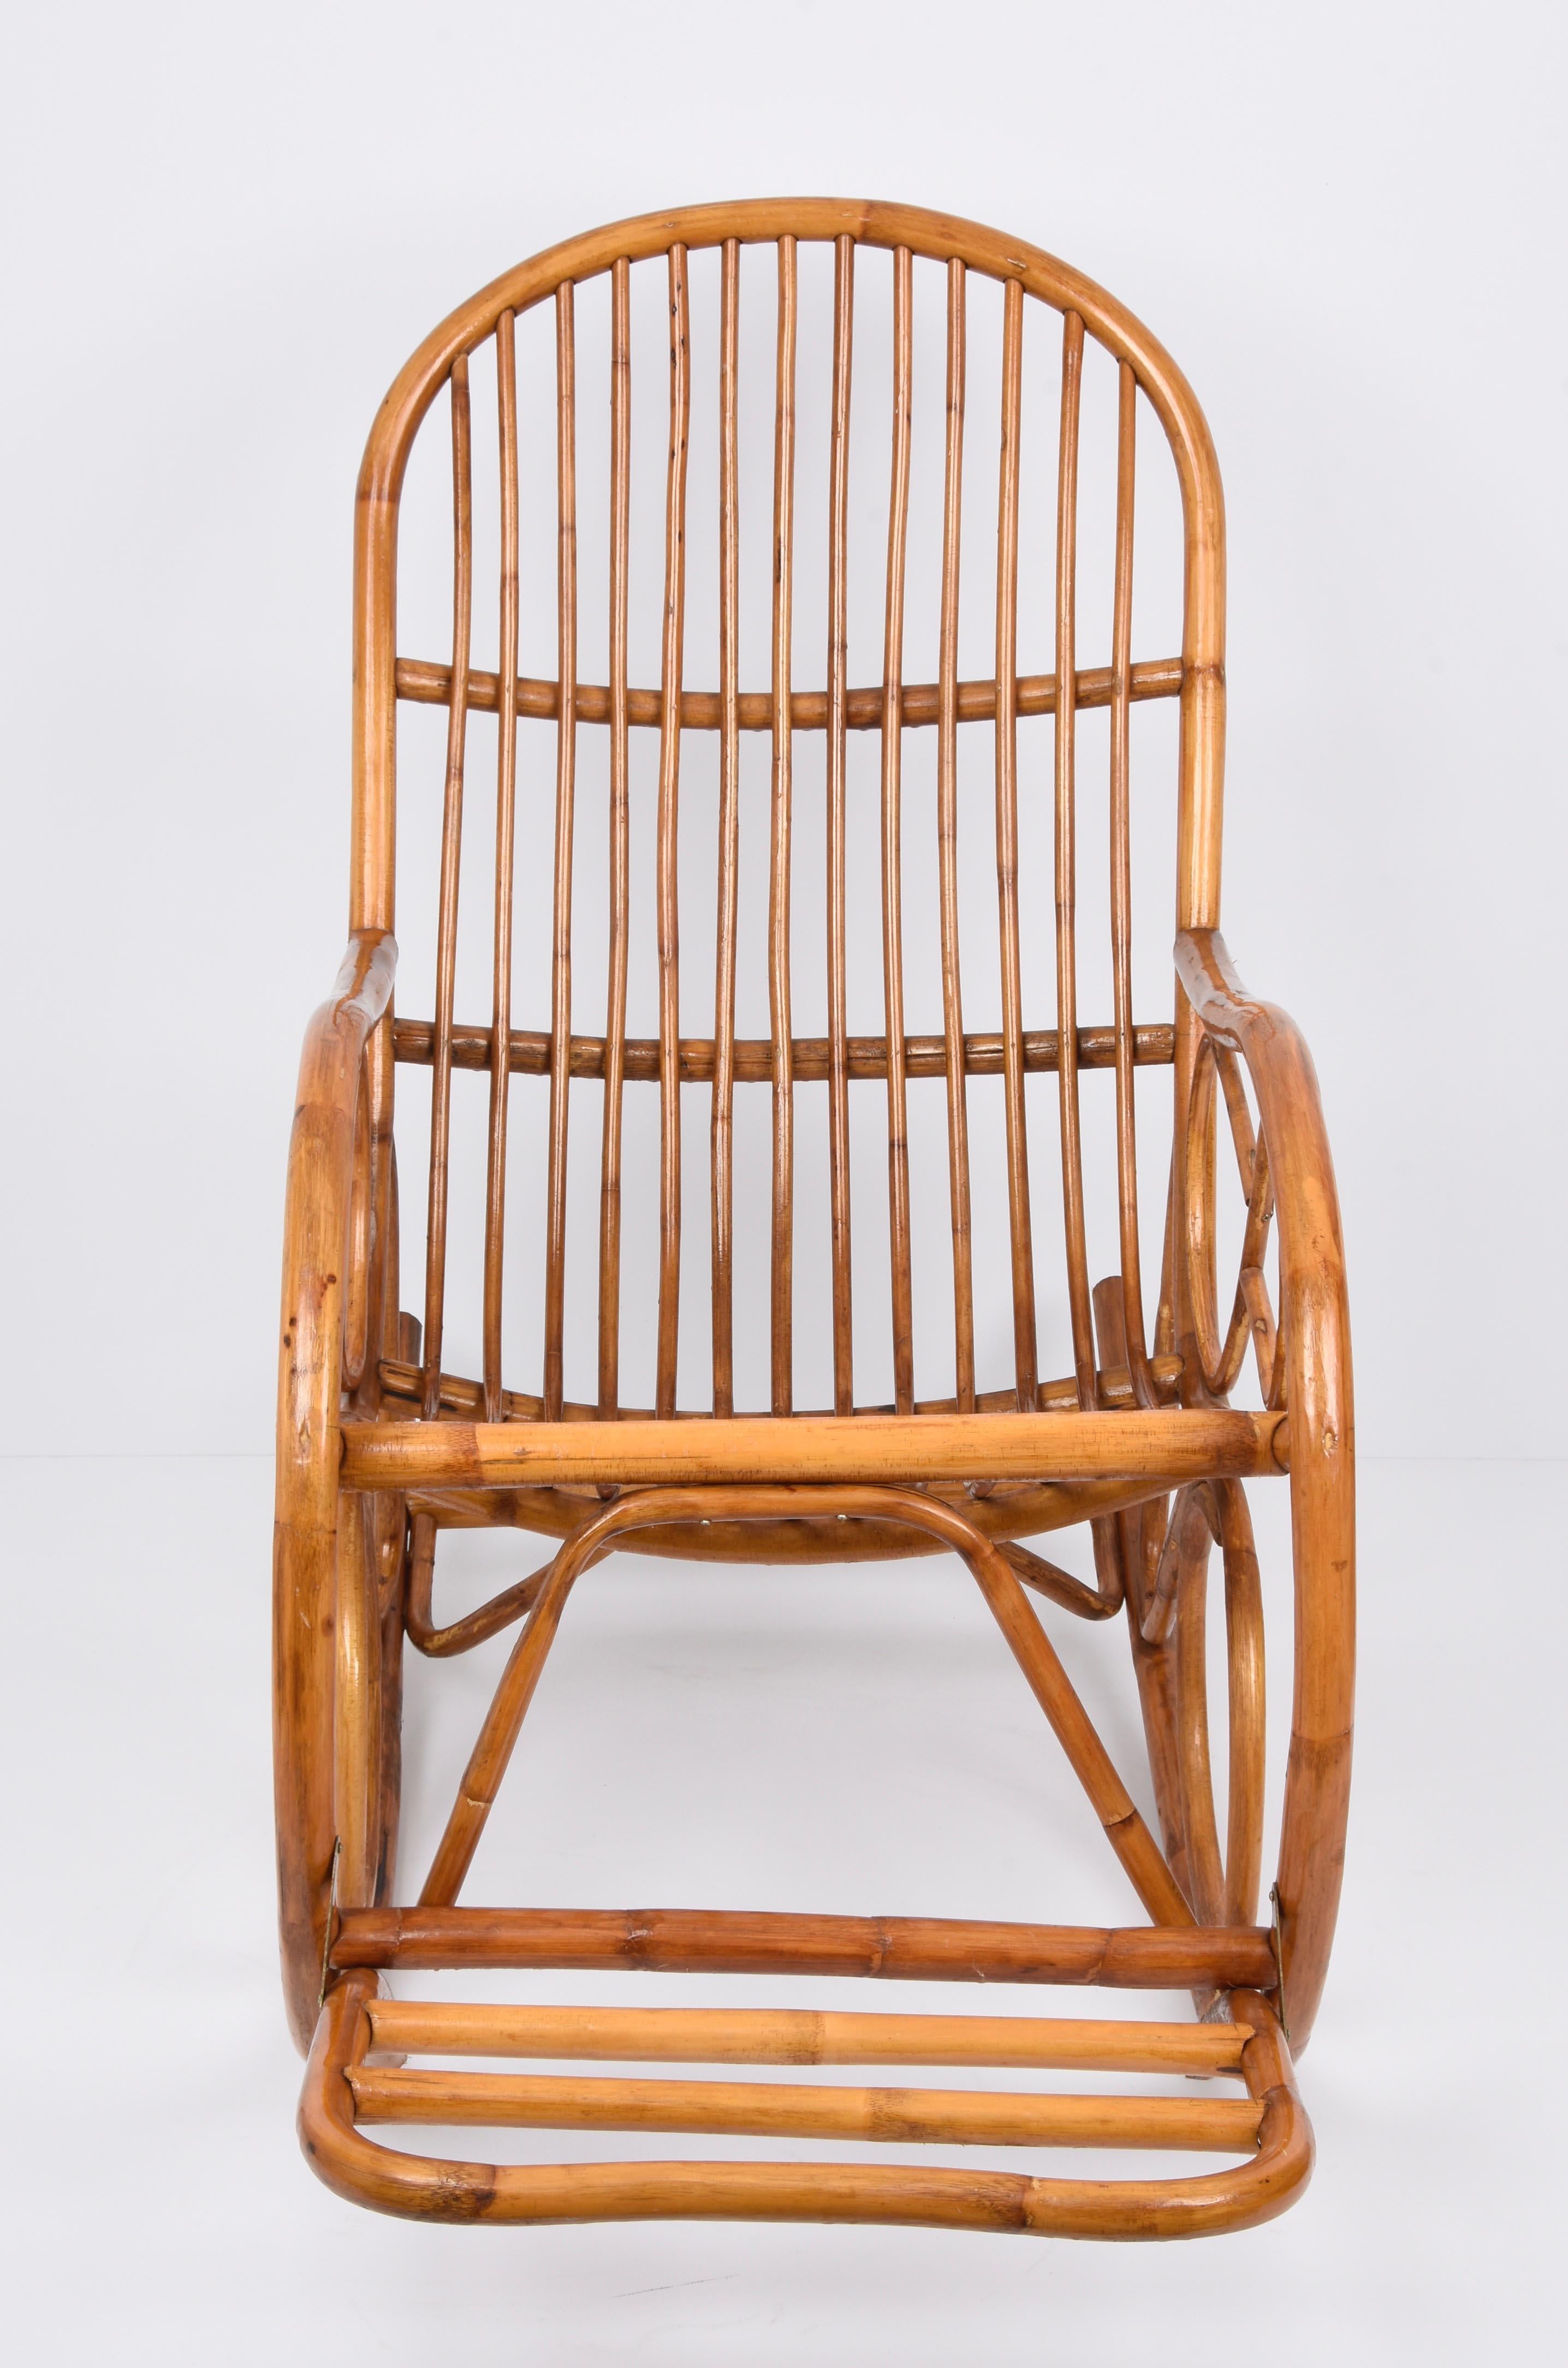 Midcentury French Riviera Rattan and Bamboo Italian Rocking Chair, 1970s For Sale 1